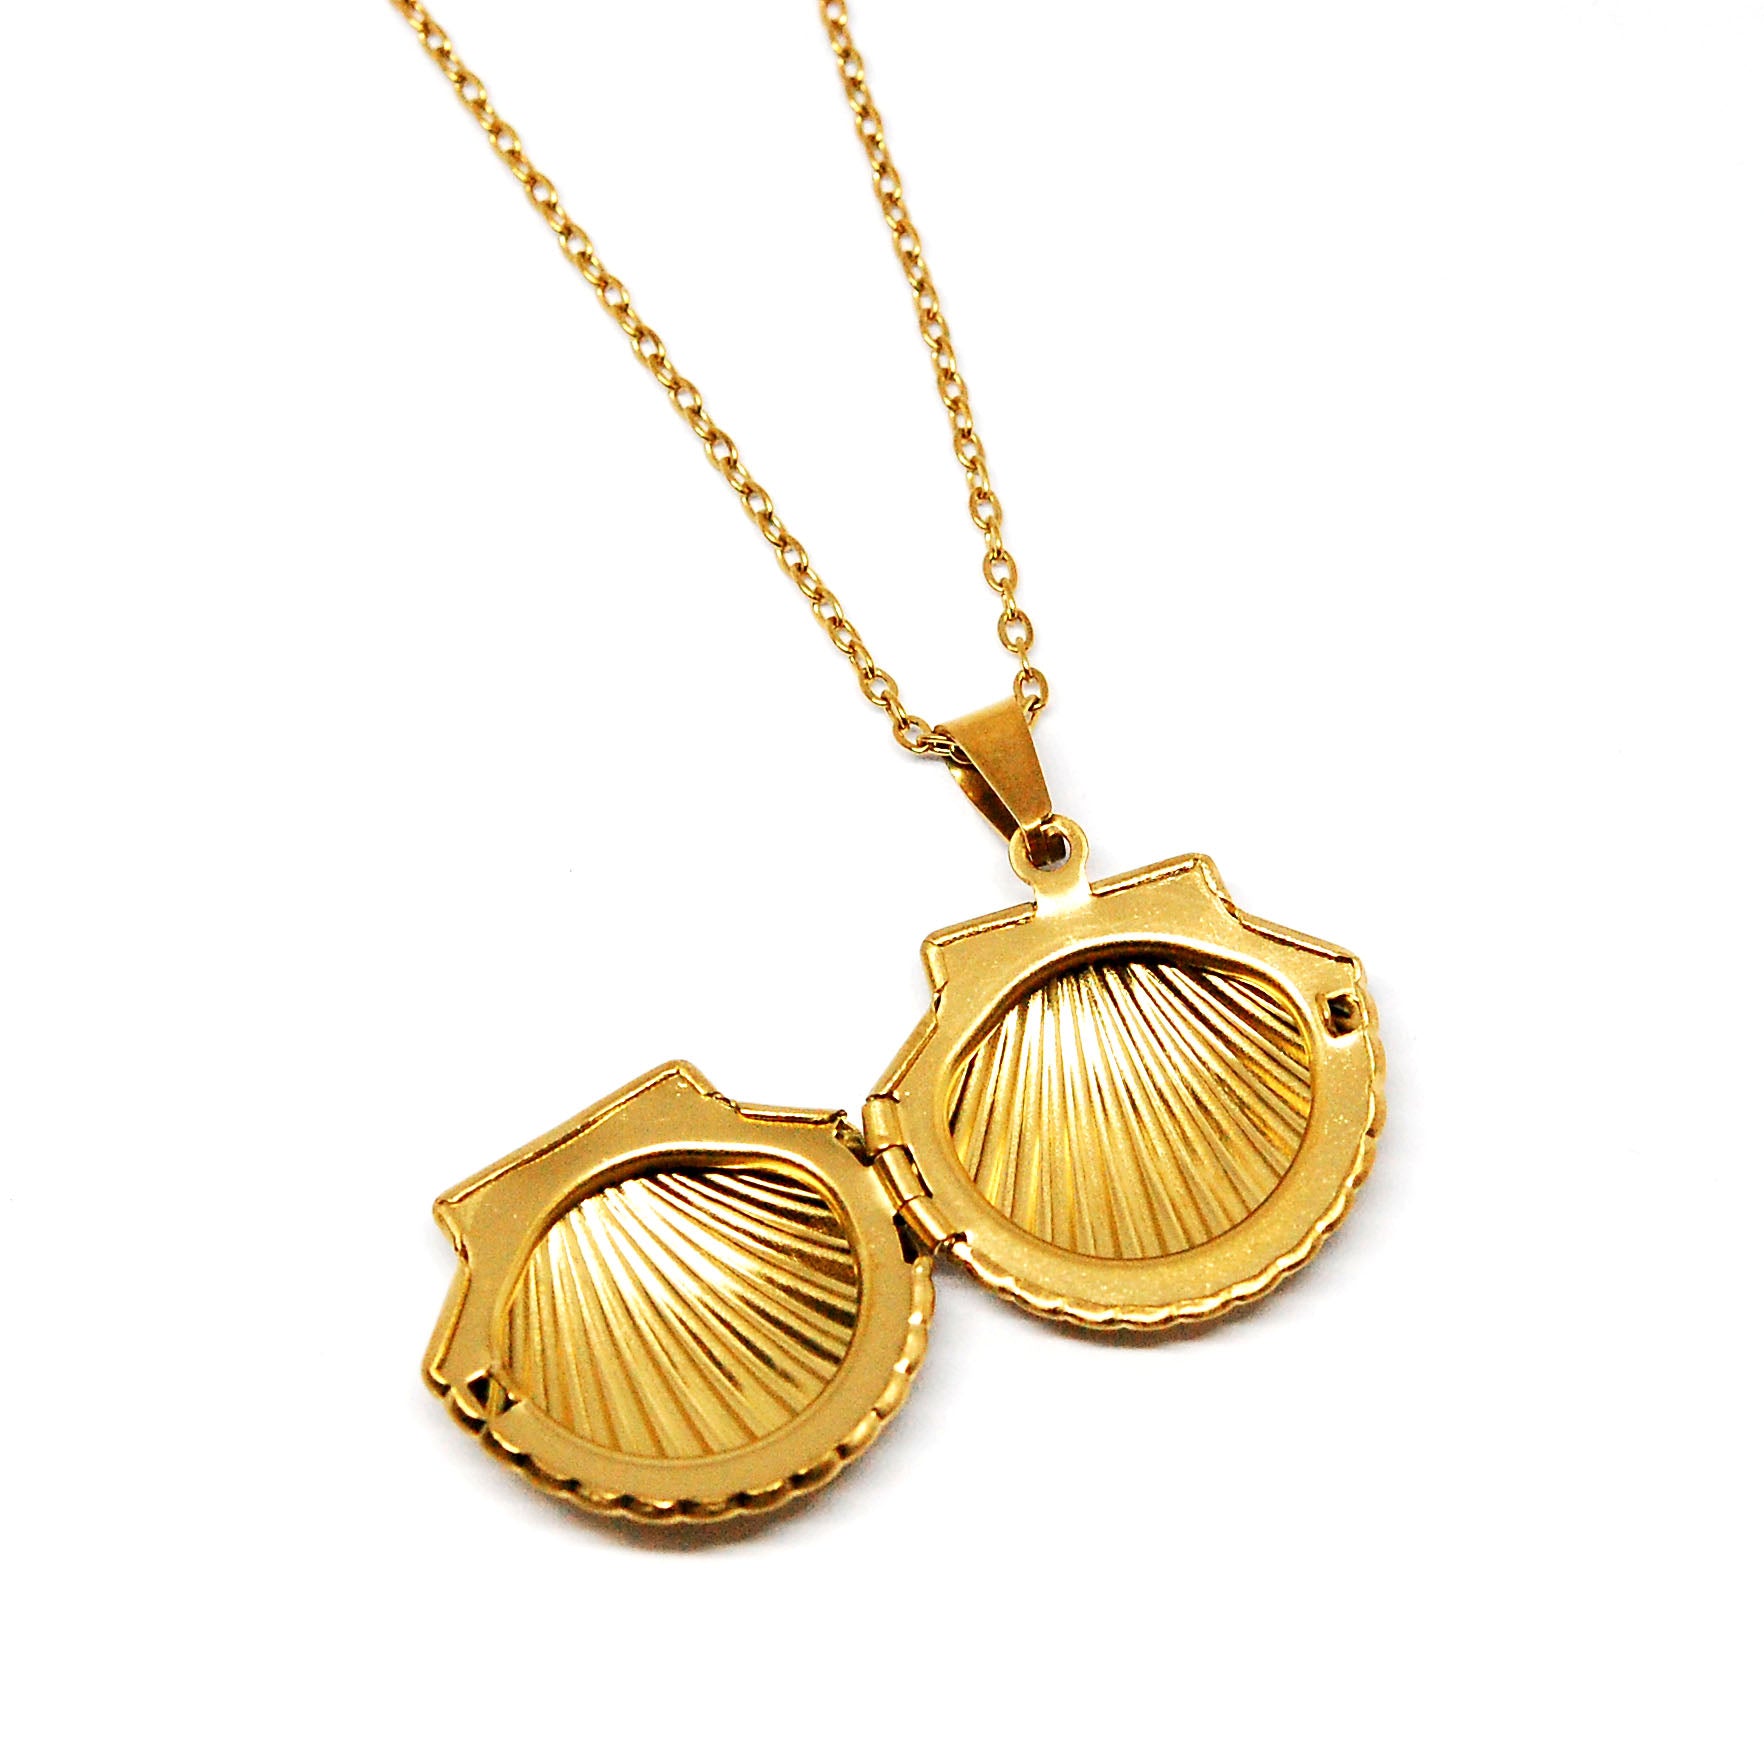 ESN 7374: Gold Plated 23mm Shell Locket w/ 17" Med Link Chain